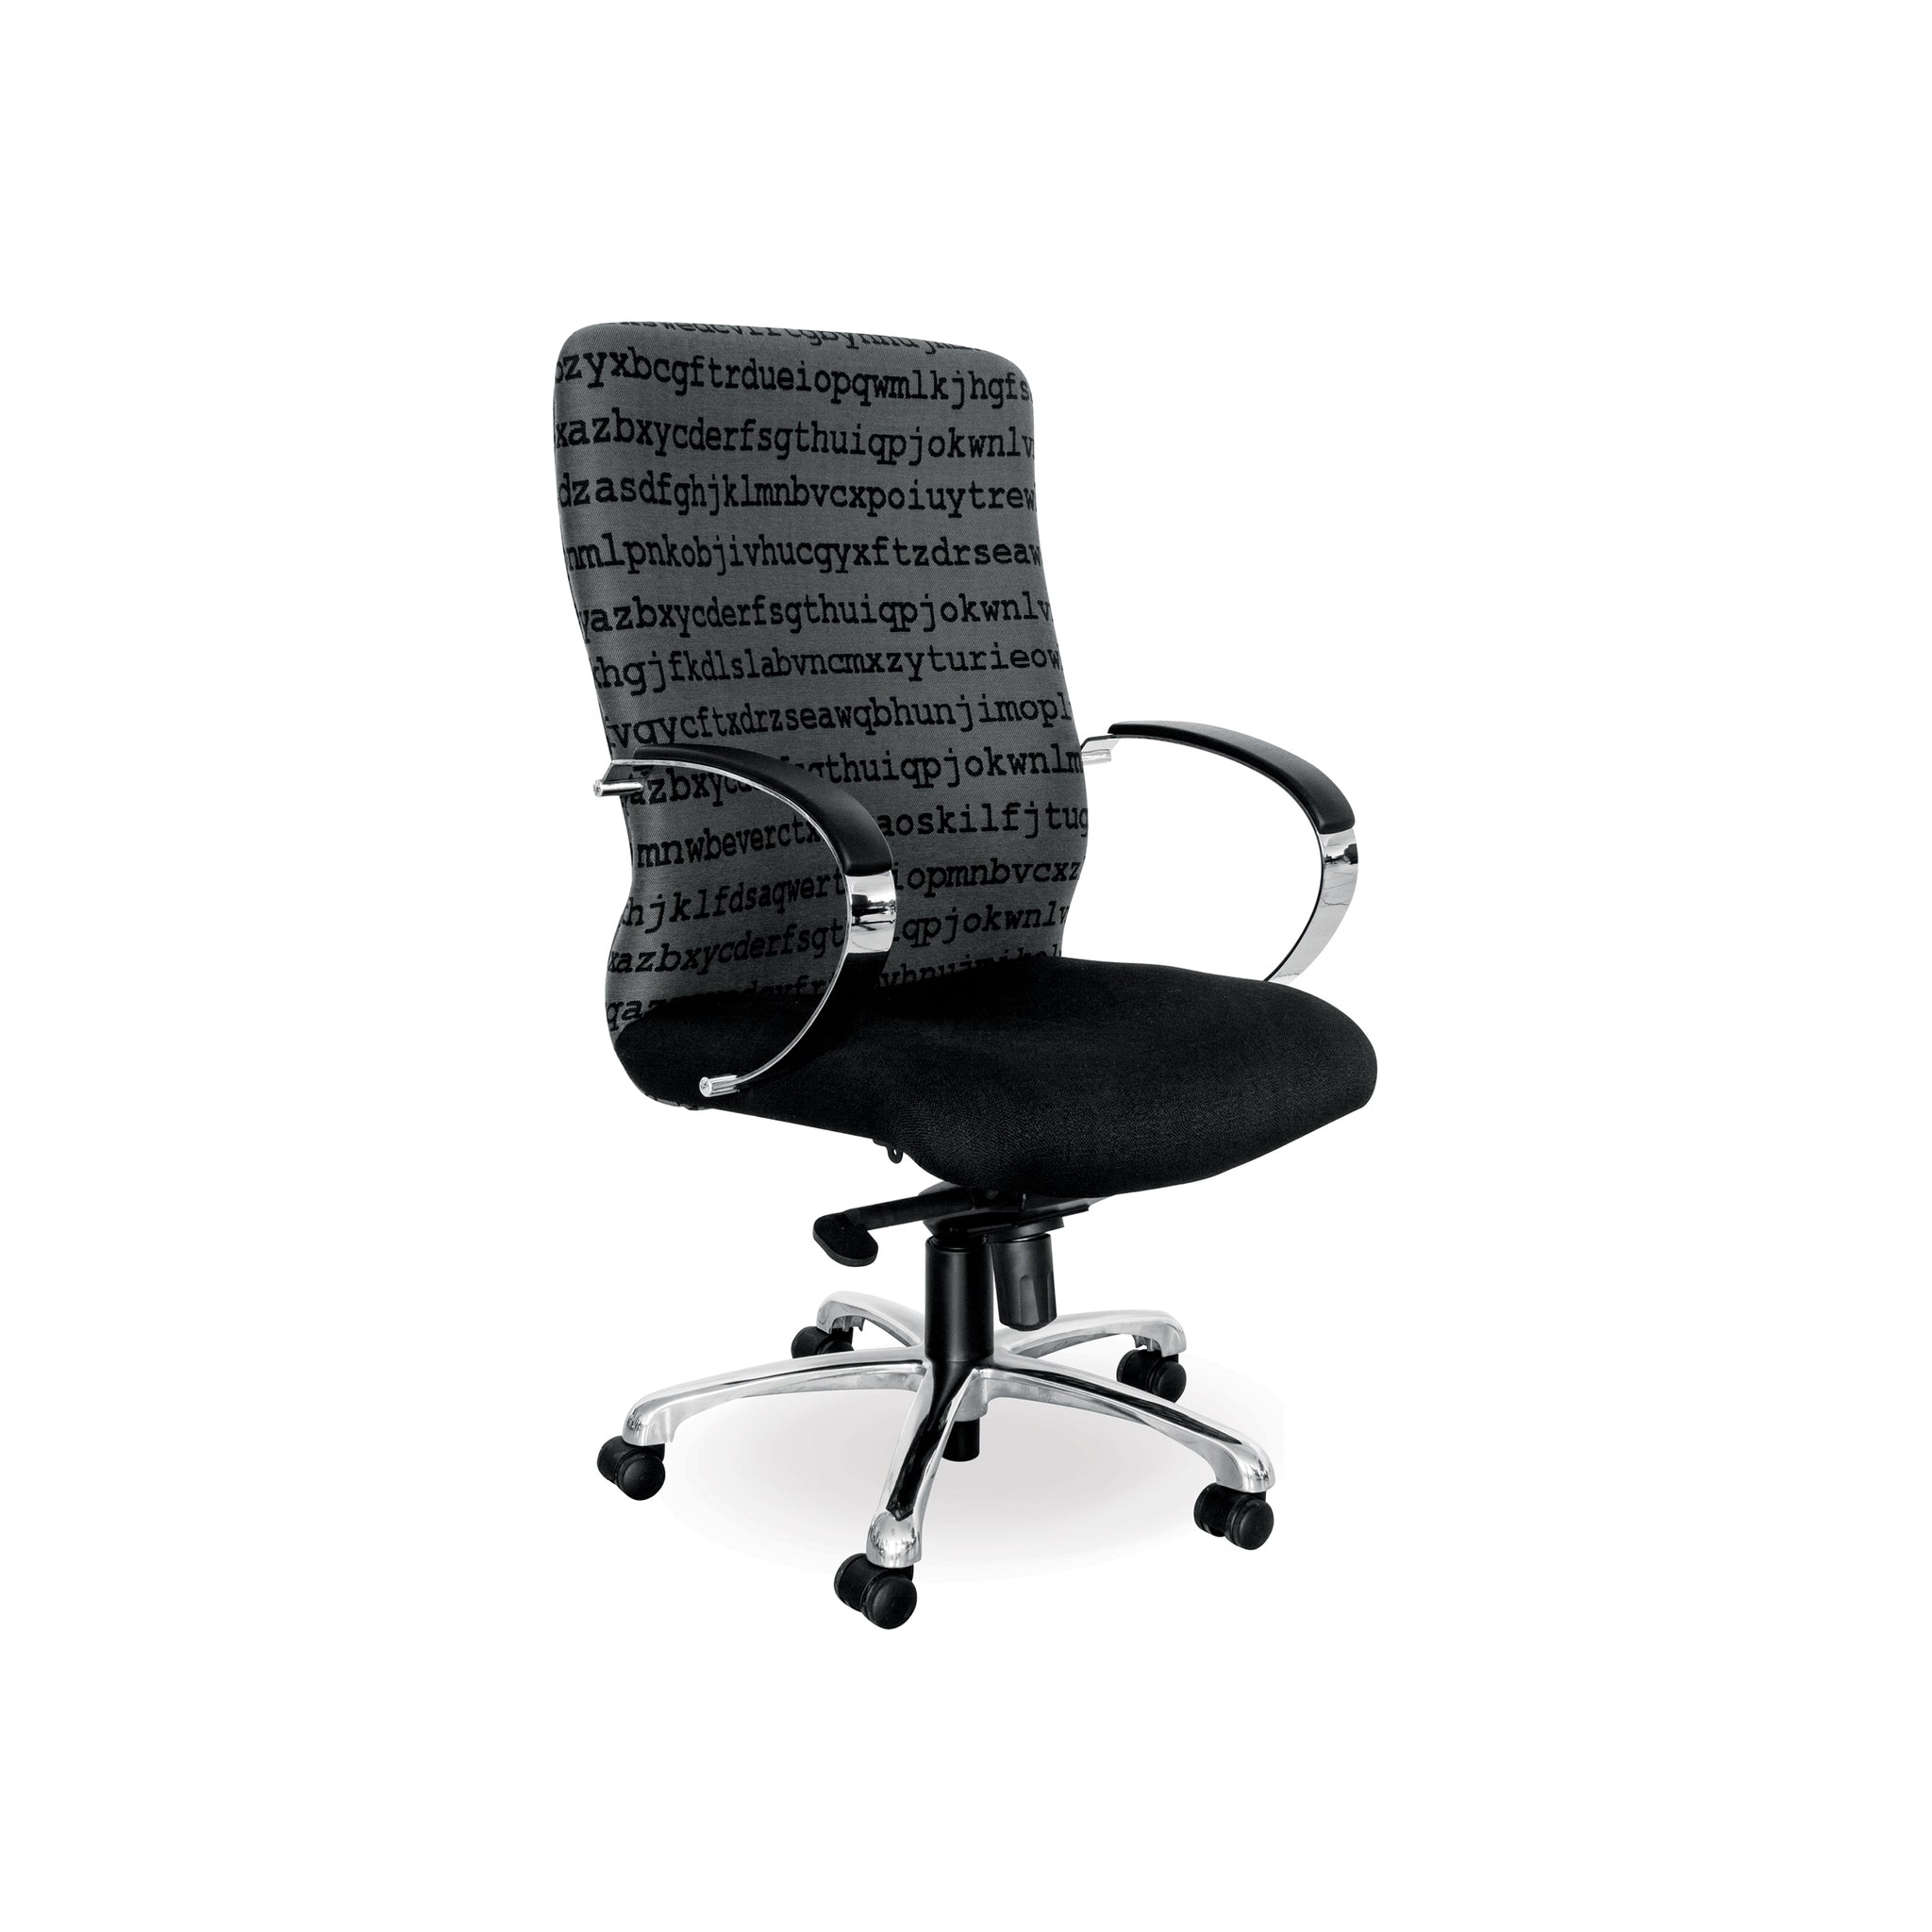 Hedcor texas office chair